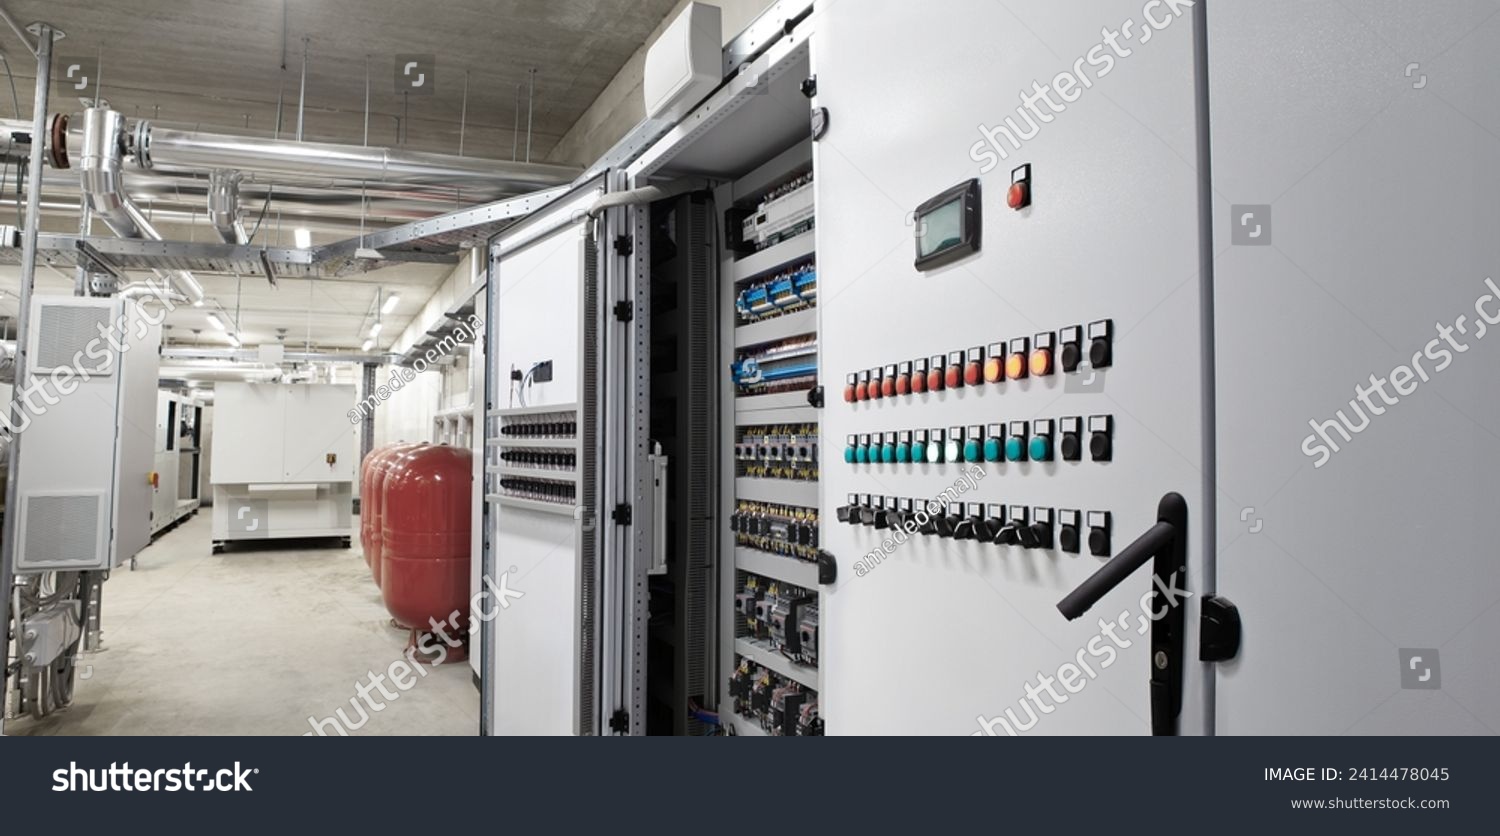 Electrical panel cabinet for HVAC system control, managing heating, ventilation, air conditioning, and cooling. Climate control system, including the boiler room, ensures comfort of the rooms building #2414478045